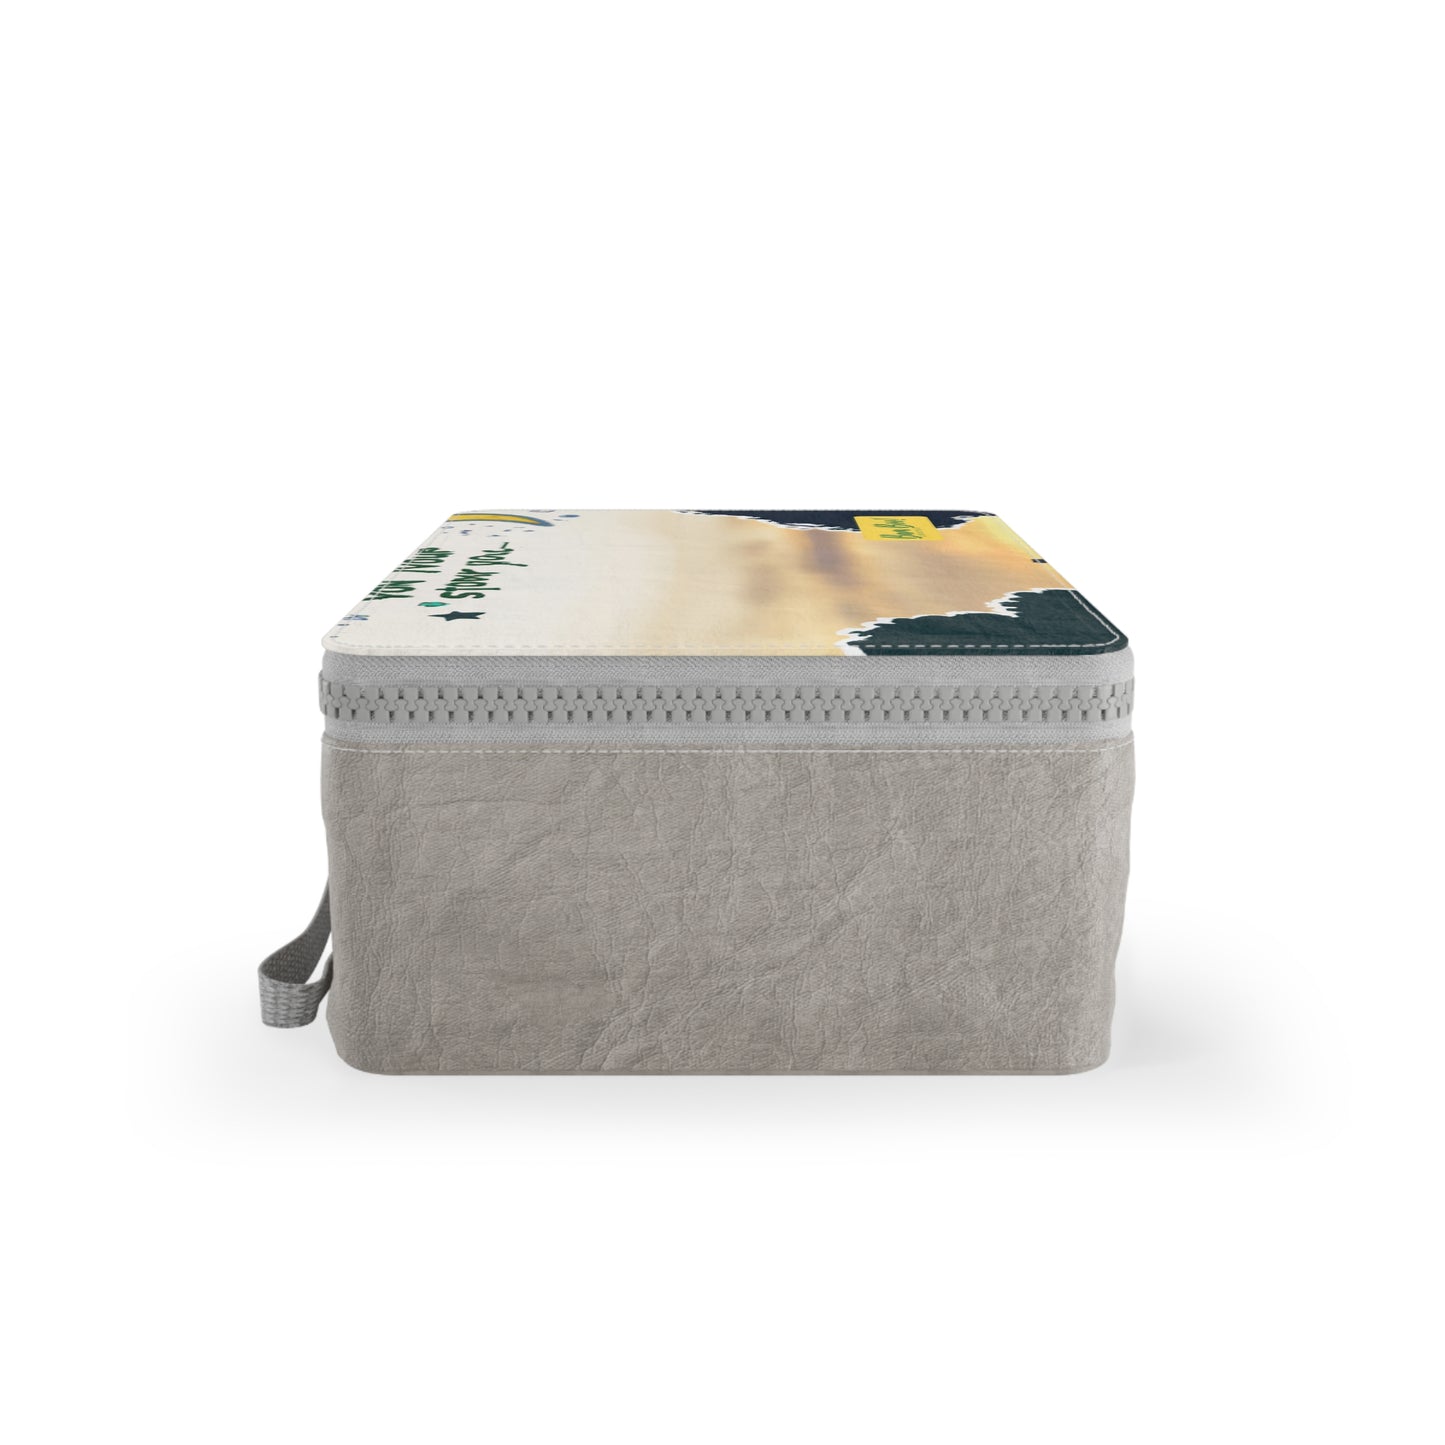 "A Moment In Time: Capturing Emotion Through Art" - Bam Boo! Lifestyle Eco-friendly Paper Lunch Bag